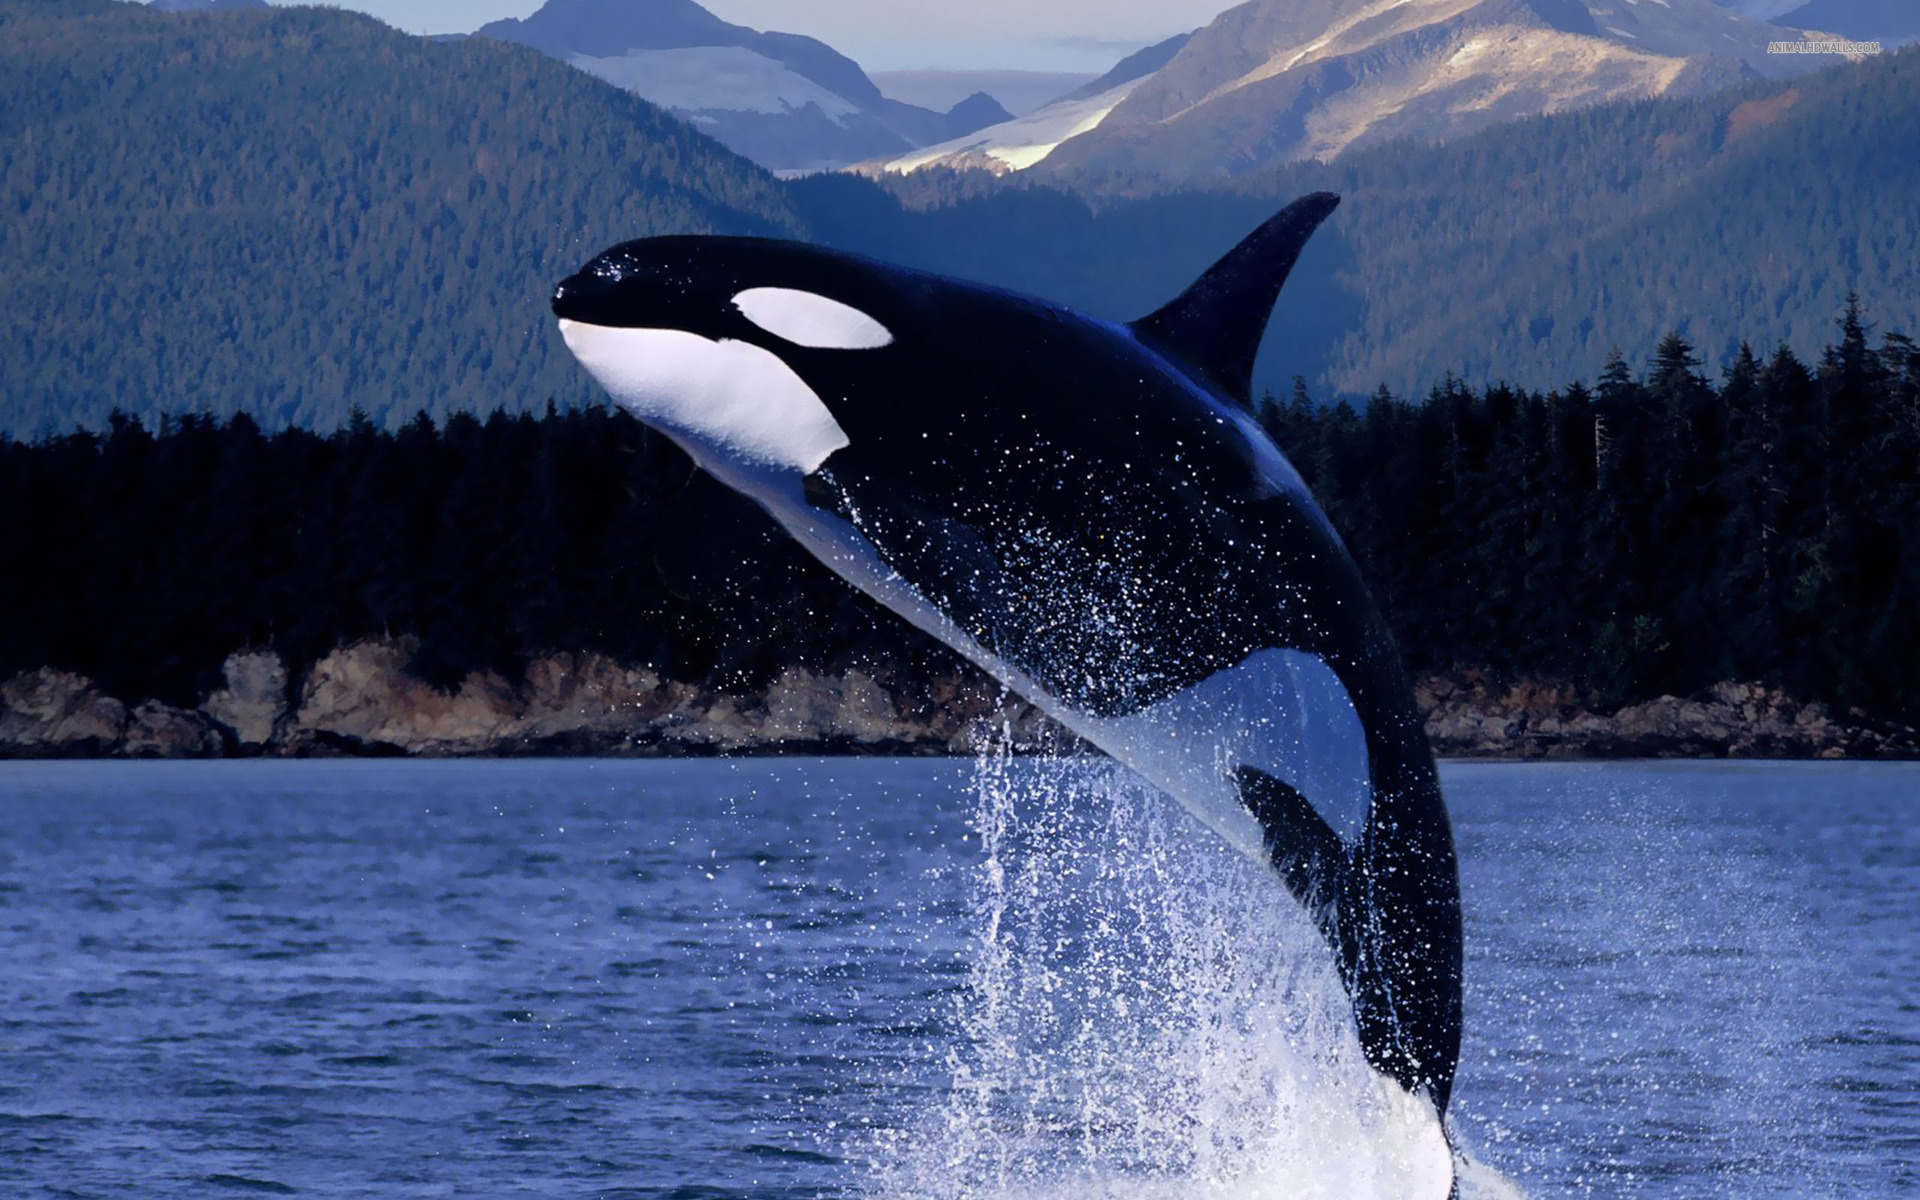 Granny: Yes of course. Even though I am old, I am not feeble. Orcas do not age like humans – we are vital yiqLLM7in